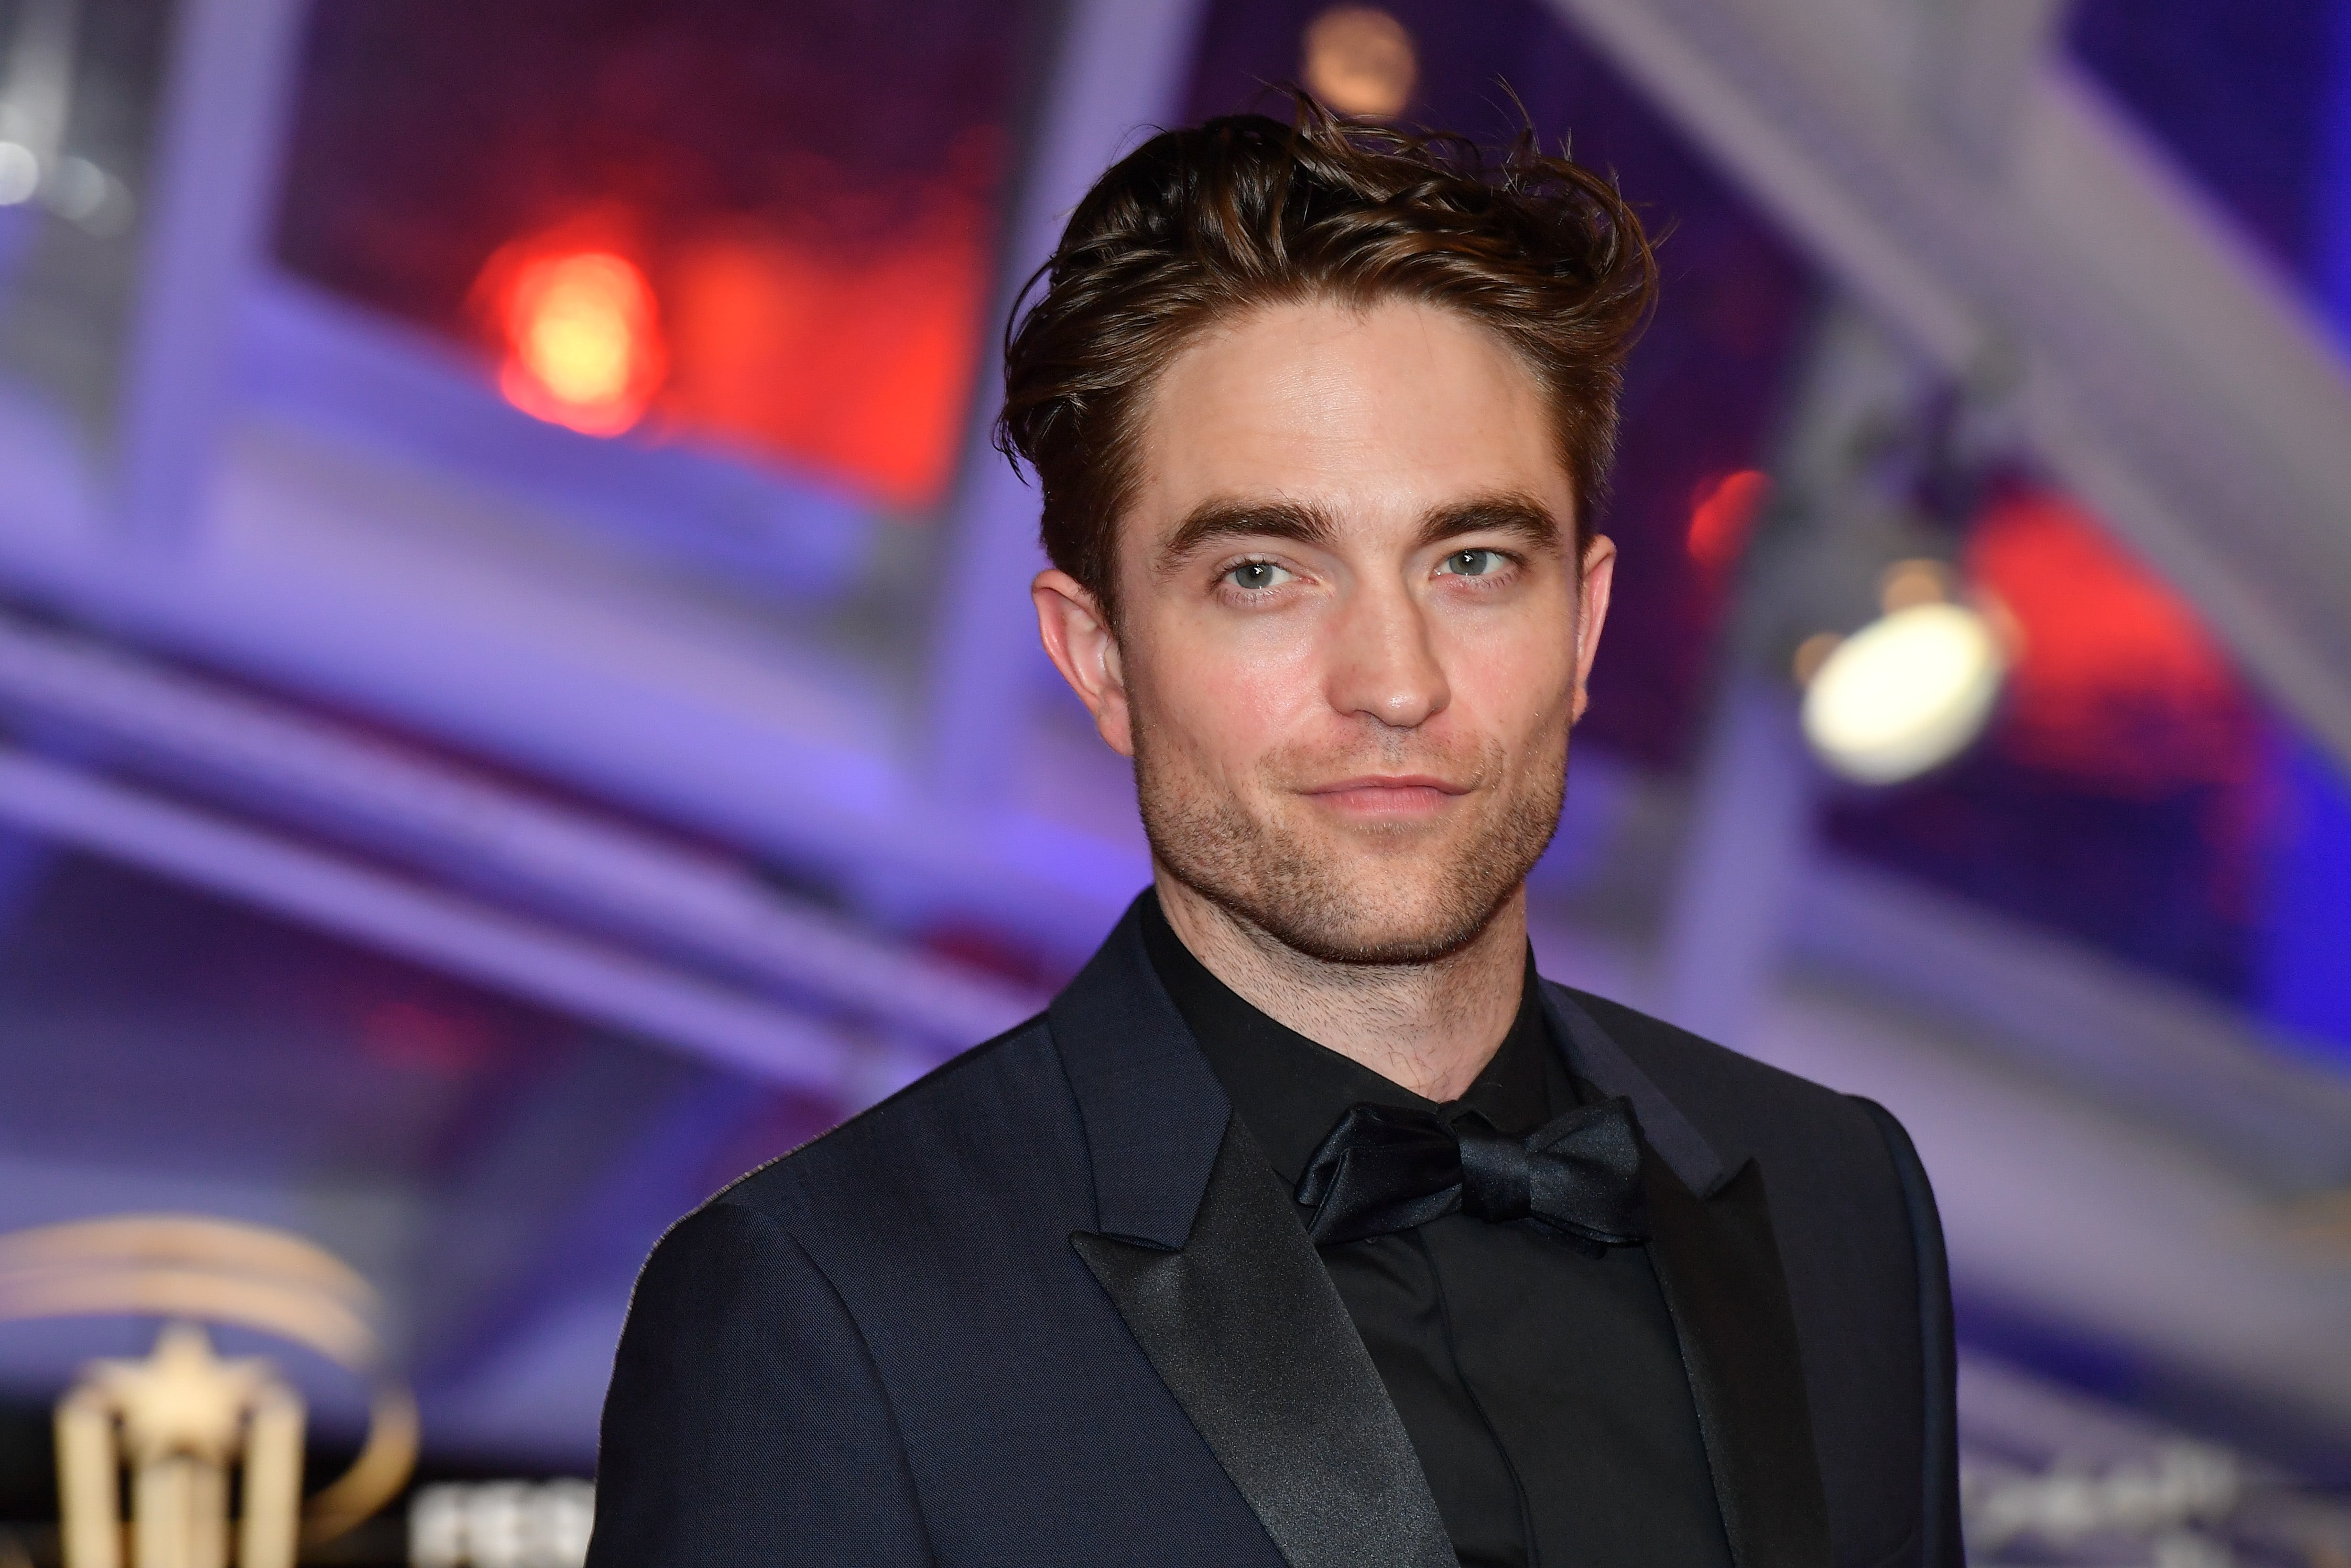 Robert Pattinson officially set to star in 'The Batman': reports